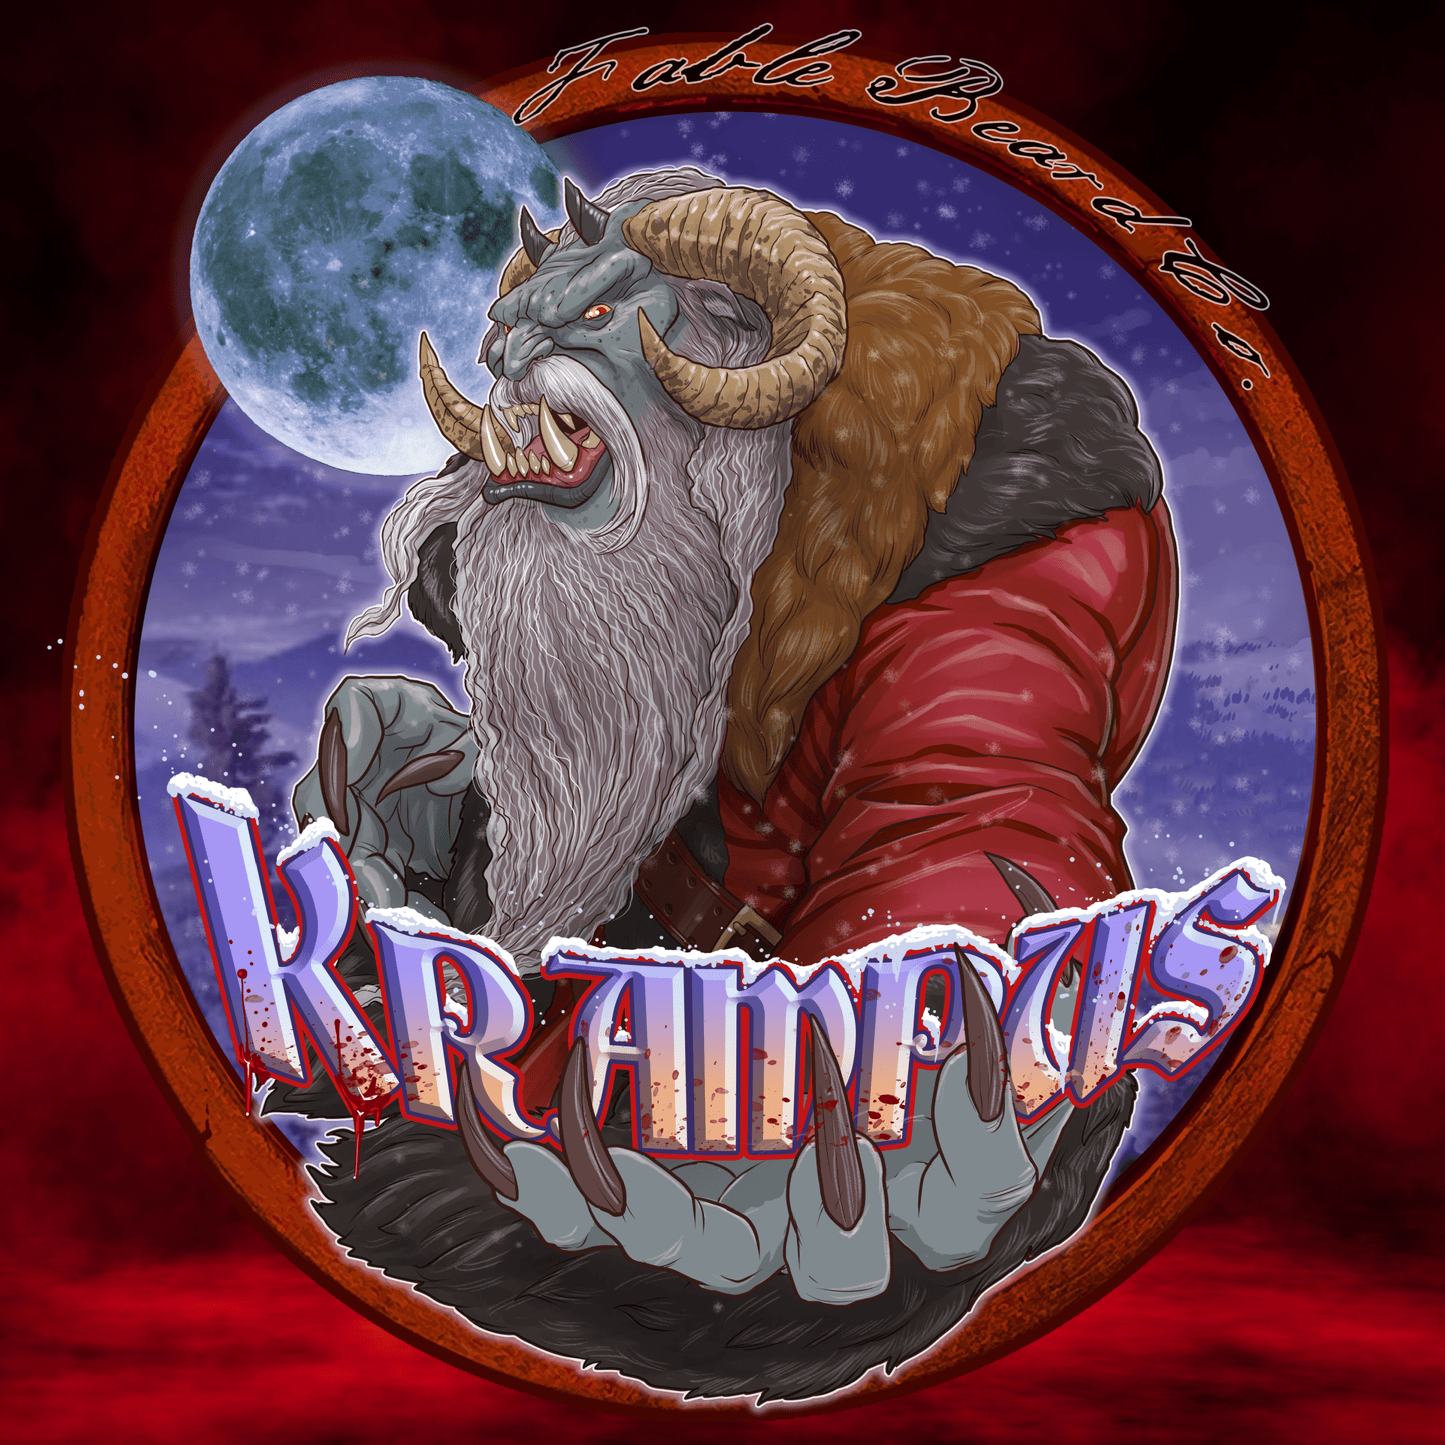 The Krampus - Beard Oil - Evergreen Wreath, Pine Boughs, and Spiced Apples